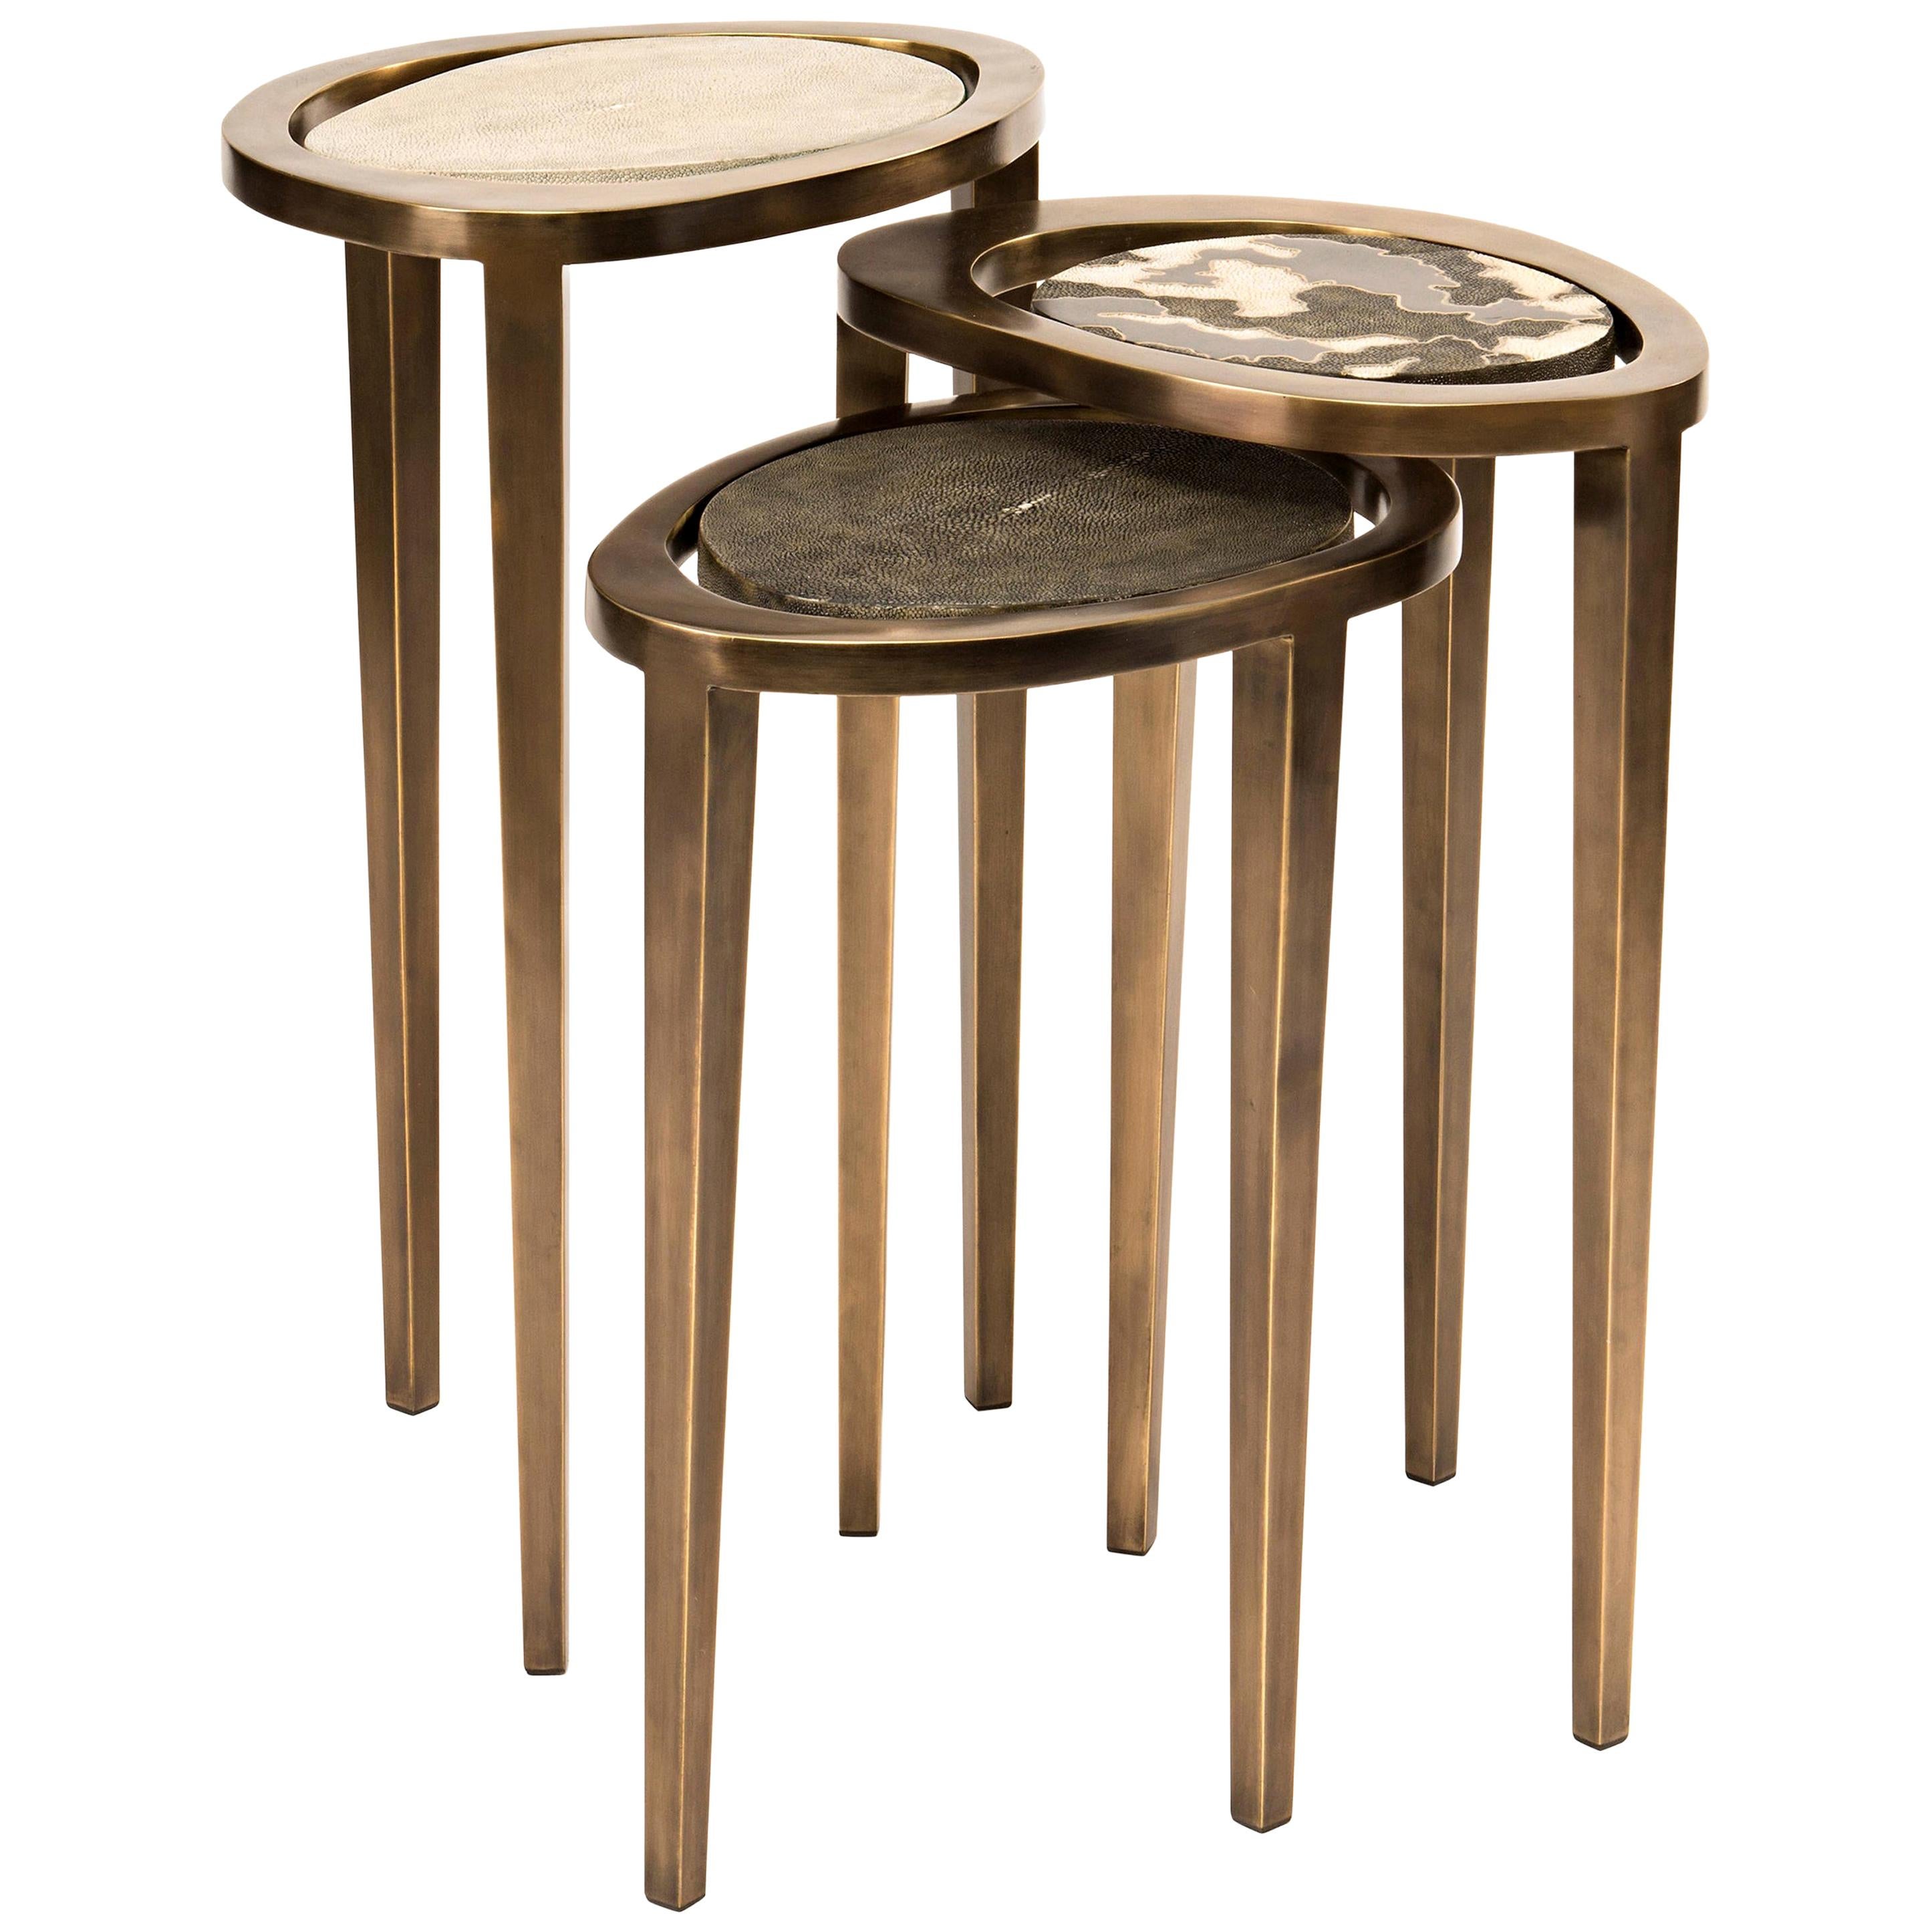 Set of 3 Shagreen Nesting Side Tables with Brass Inlay Work by R&Y Augousti